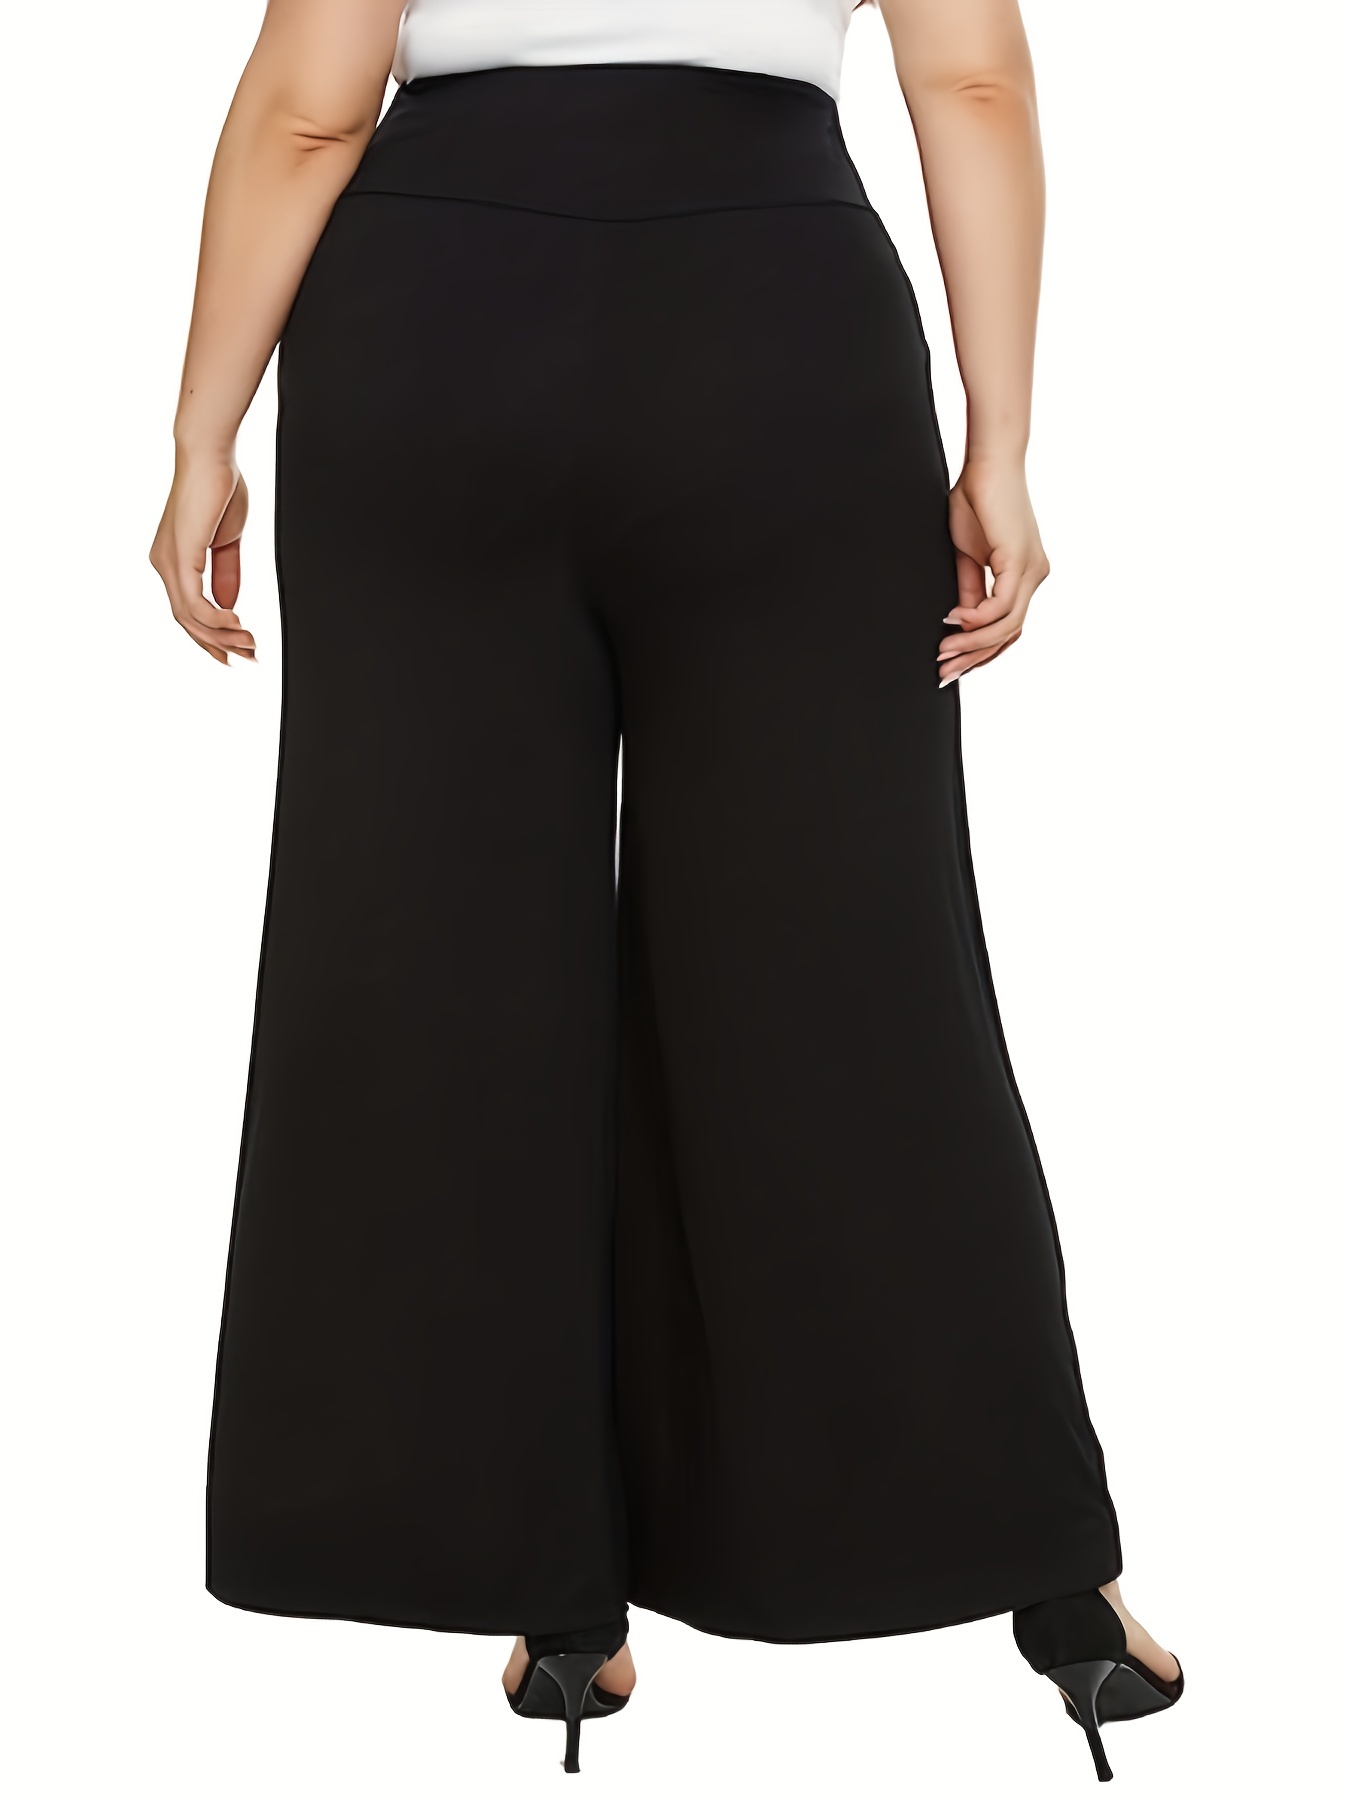 Plus Size Pants for Women Wide Leg Pants High Waisted Tummy